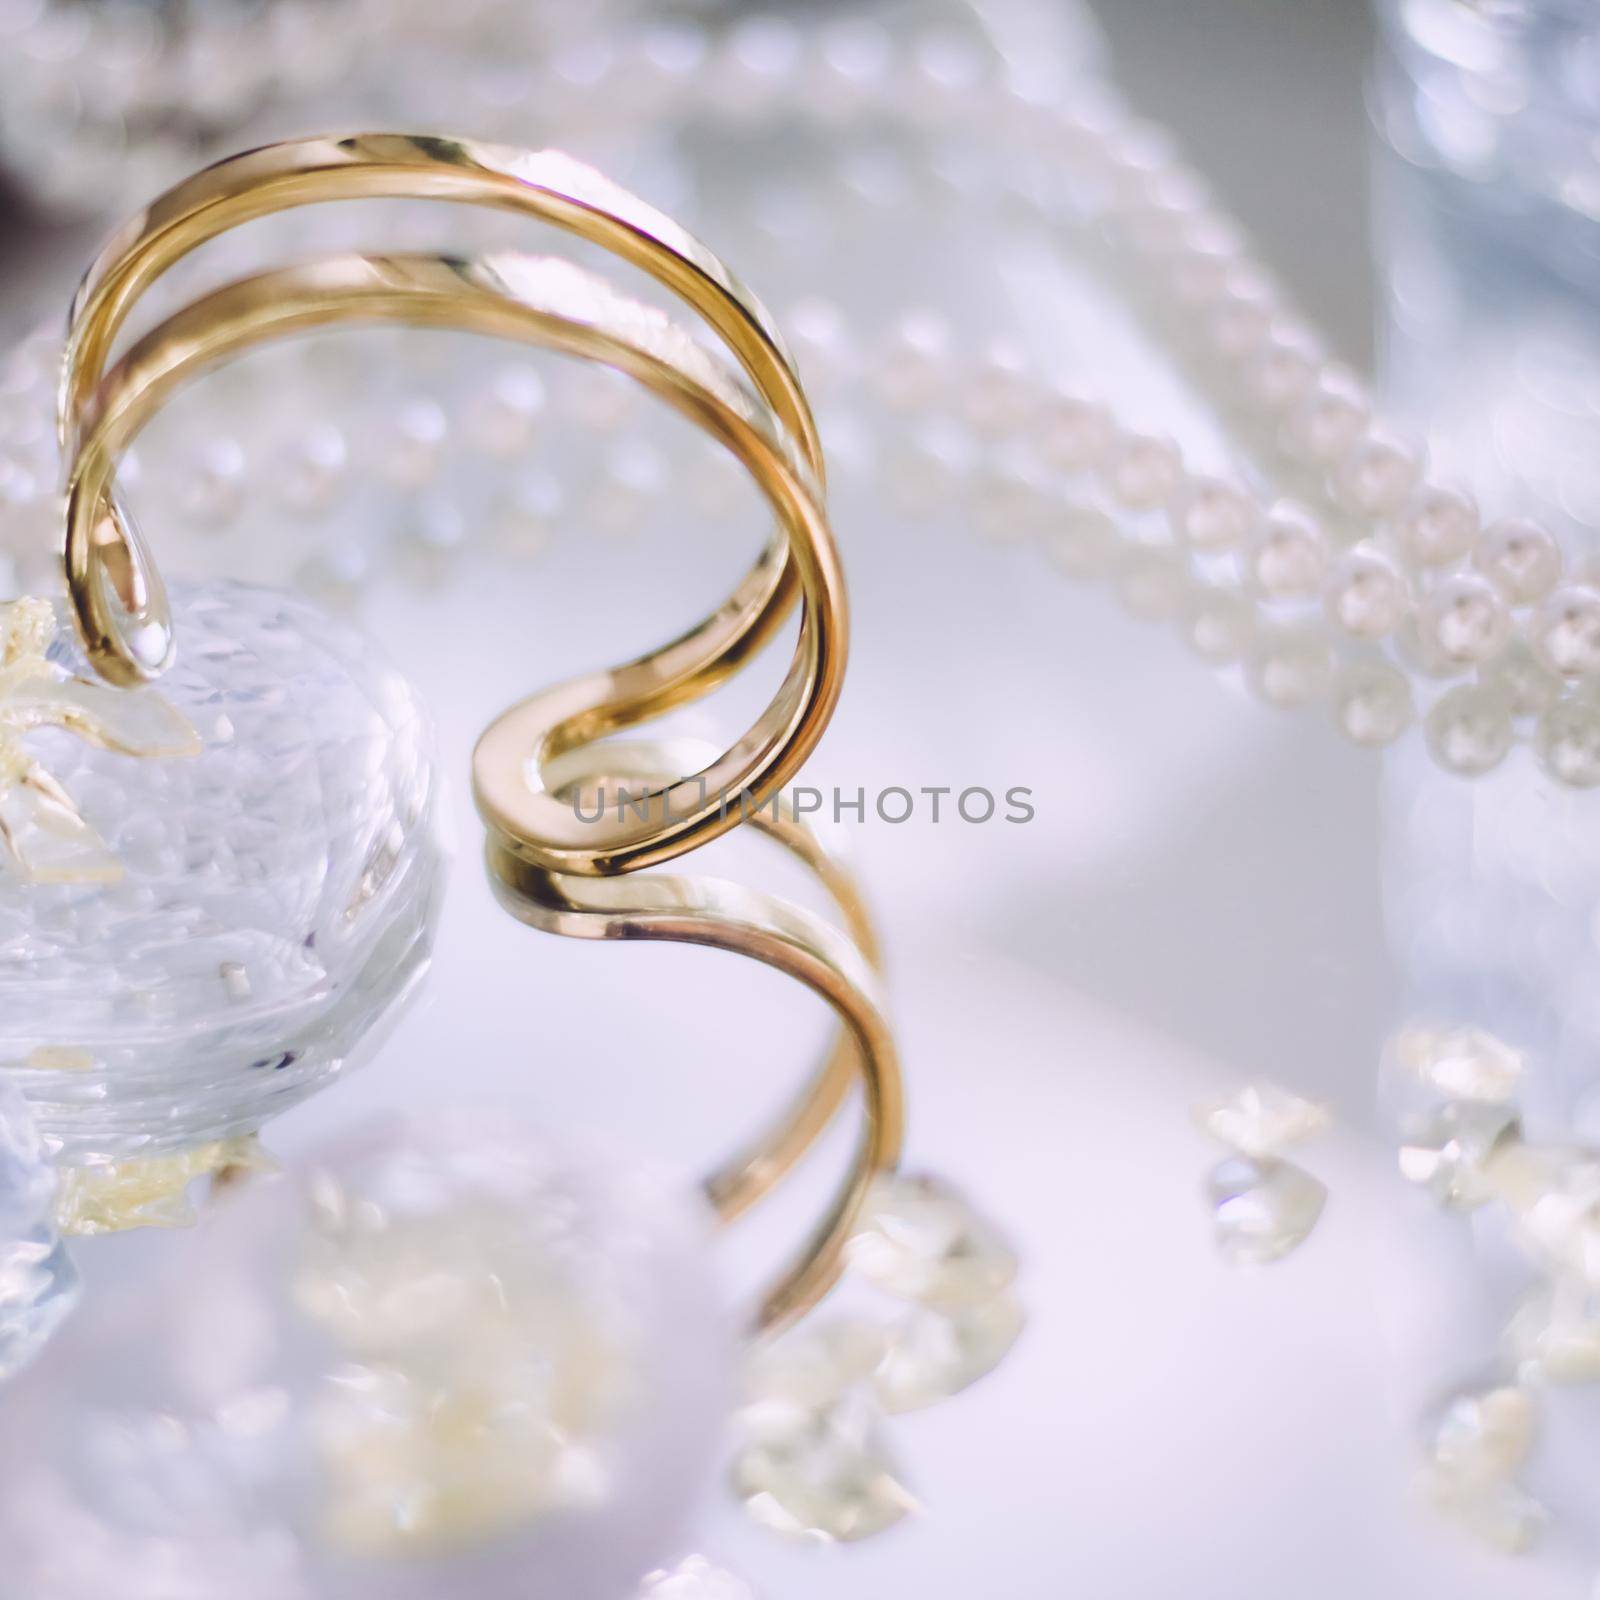 jewelry and luxury gift for her styled concept - gold, diamond and pearl jewellery beautiful set, elegant visuals